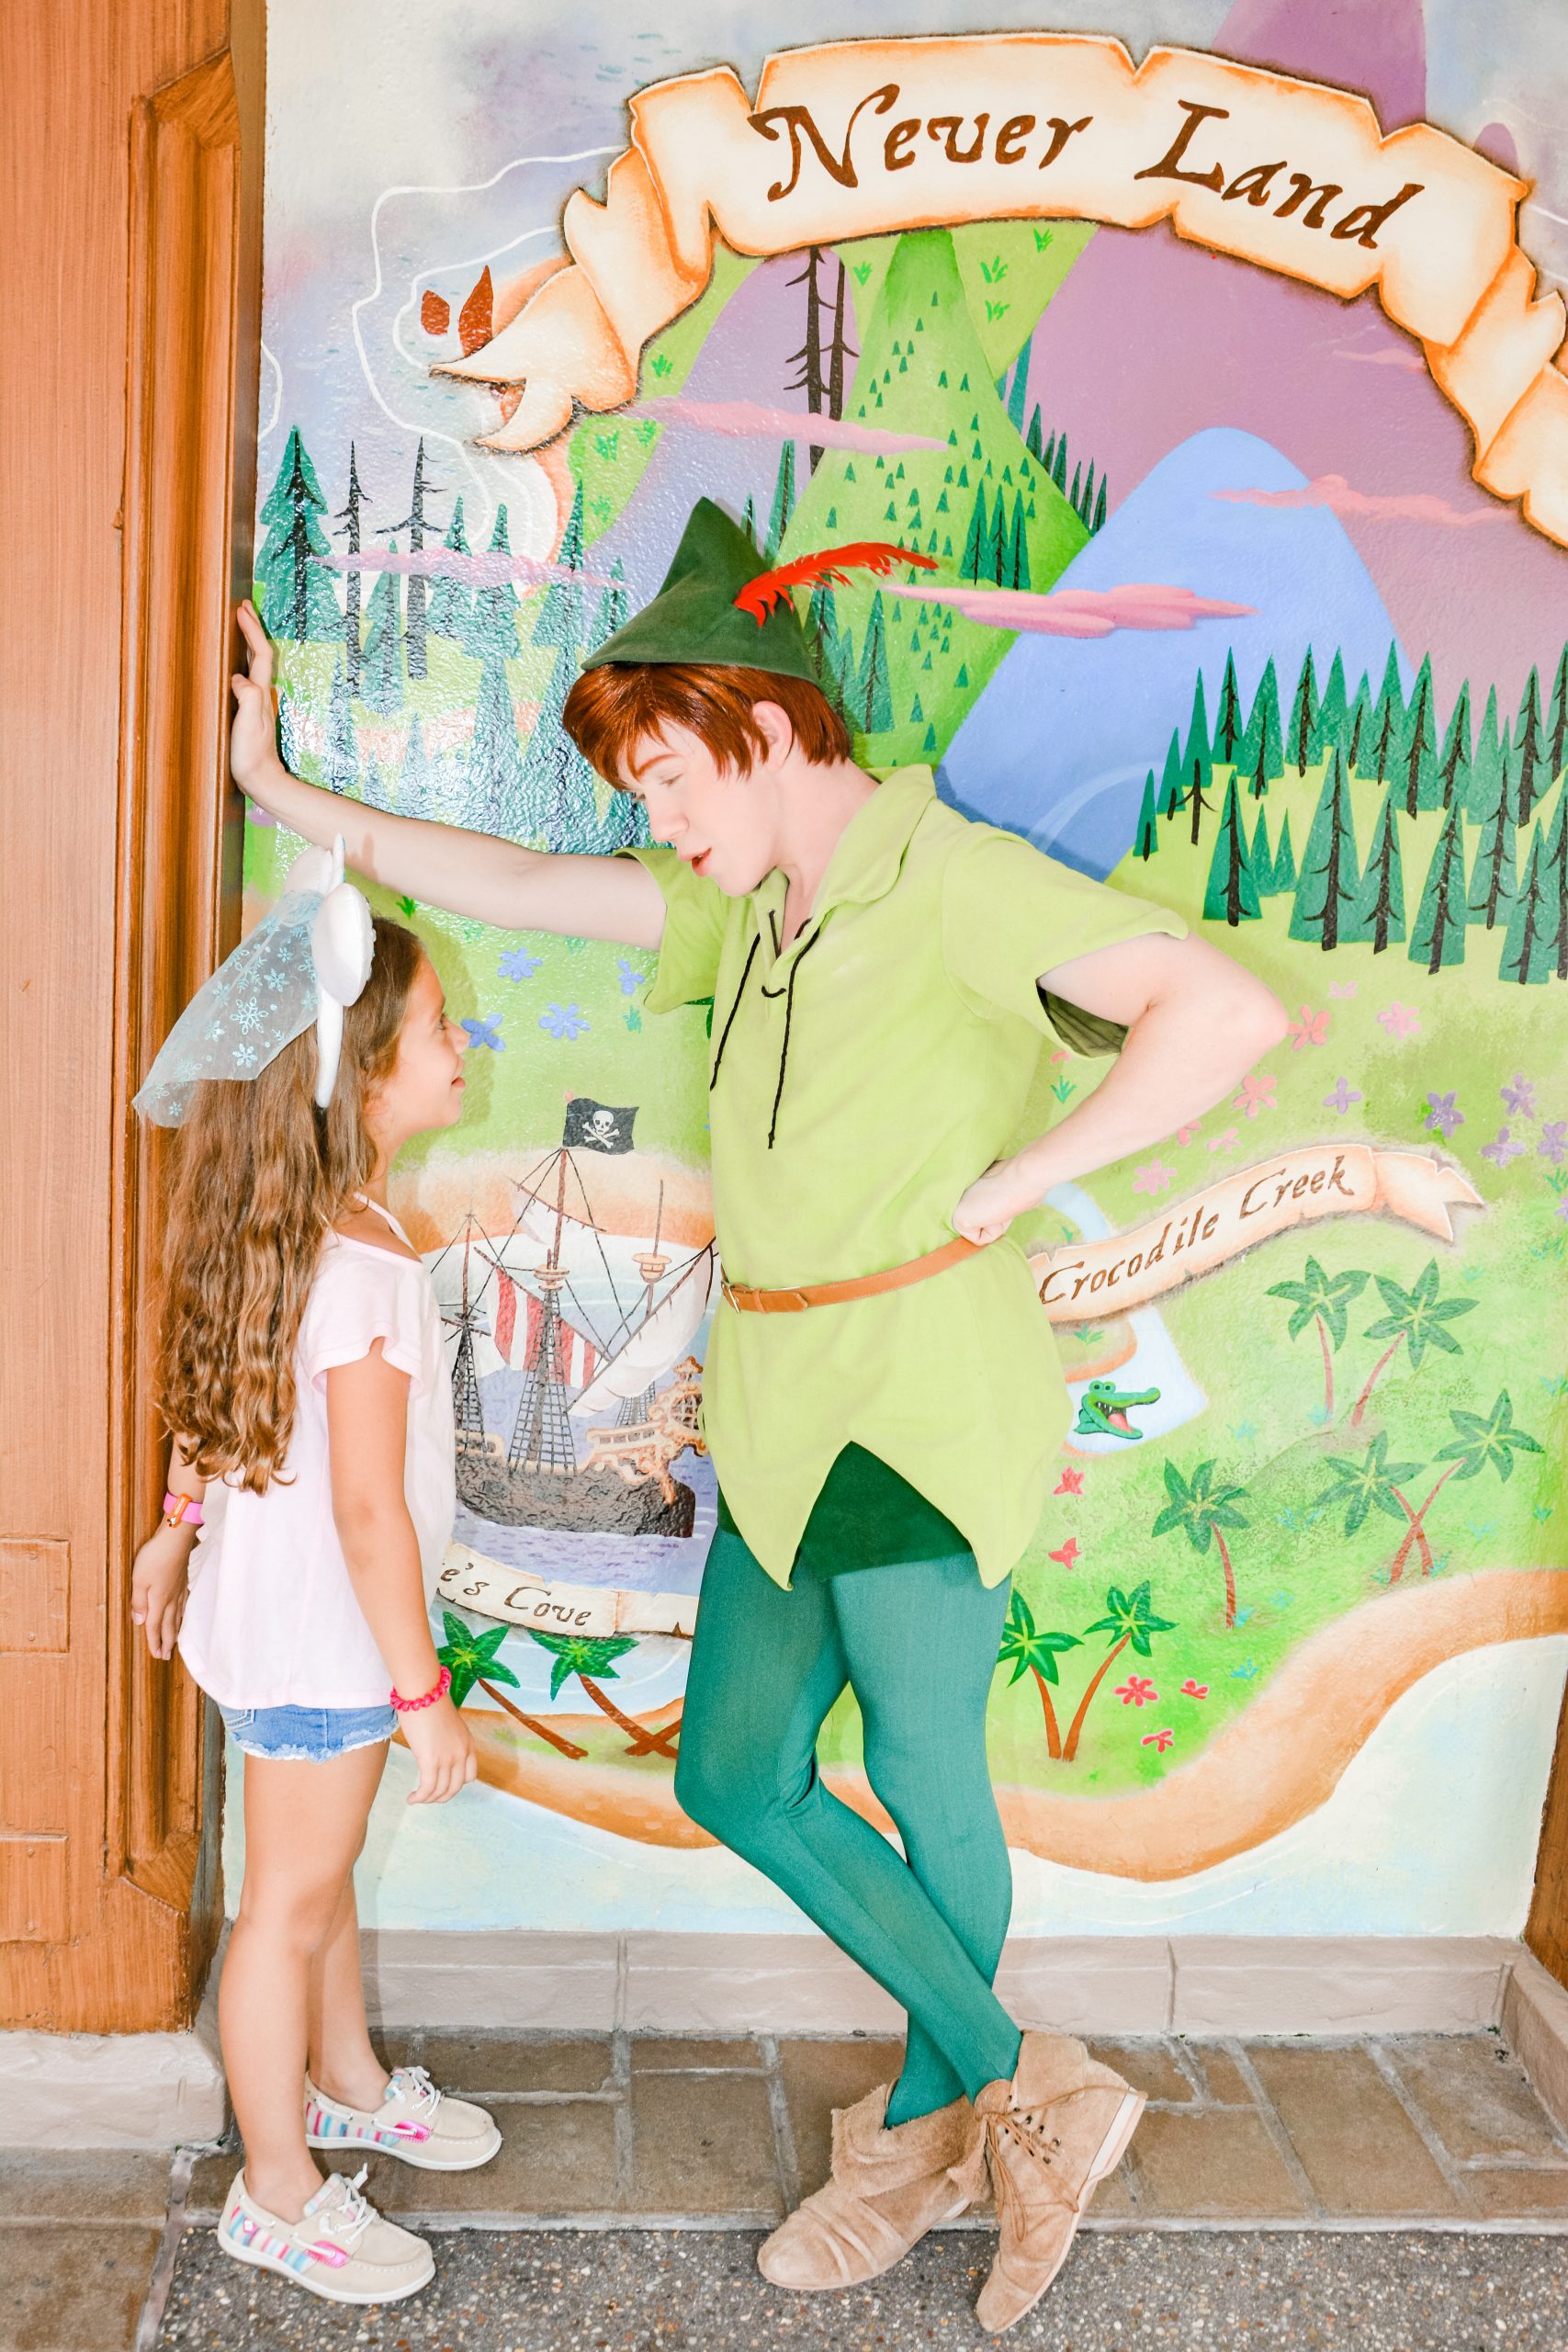 Character Meet and Greets at All of the Walt Disney World Parks